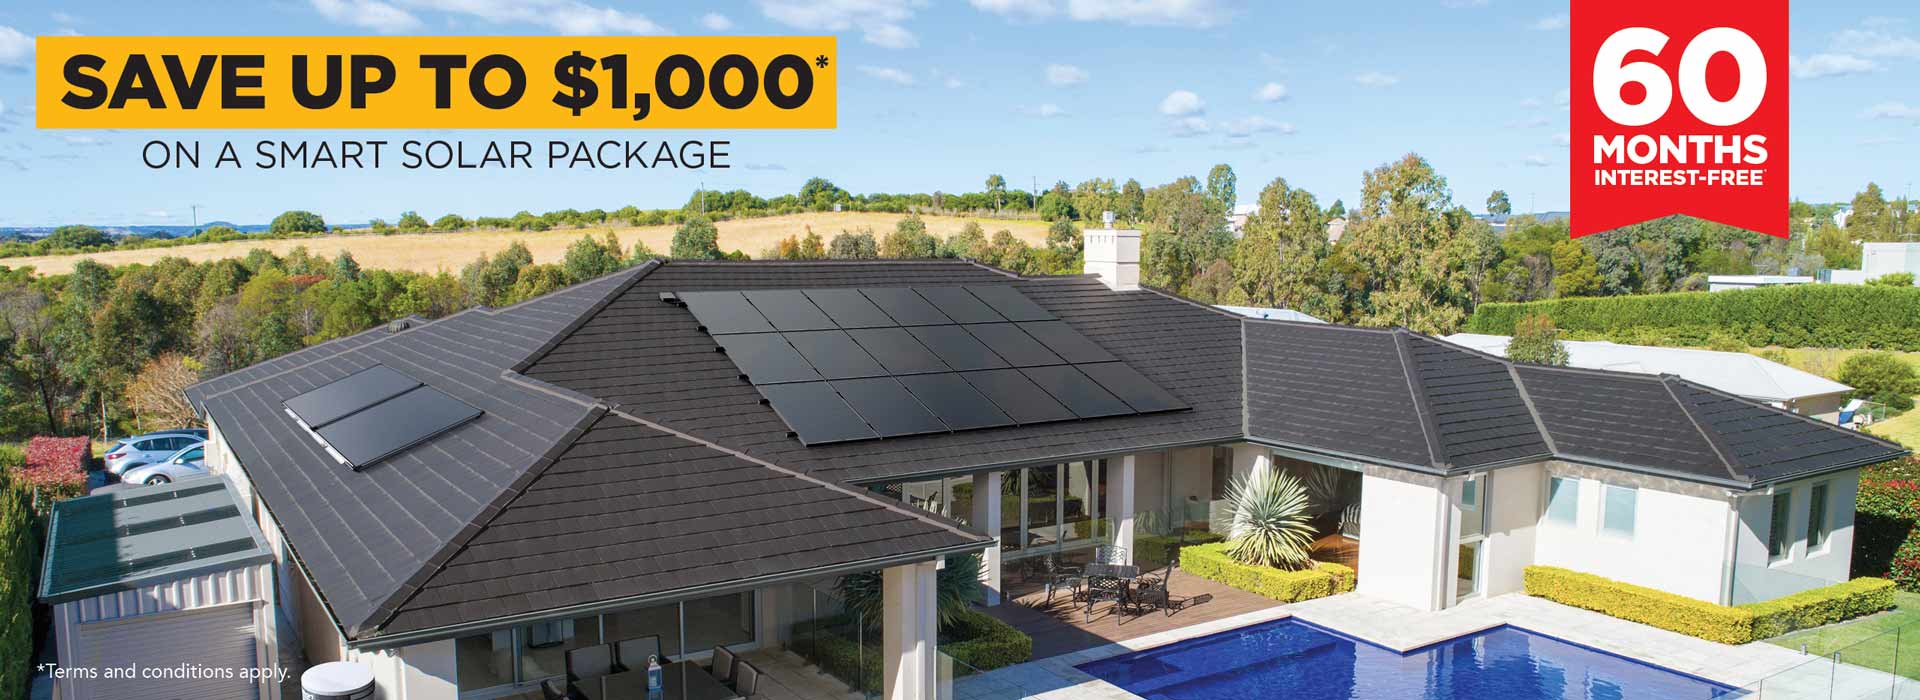 A family home with Solahart Silhouette solar panels attached to an offer of save up to $1000 on a smart solar package with 60 months interest-free.